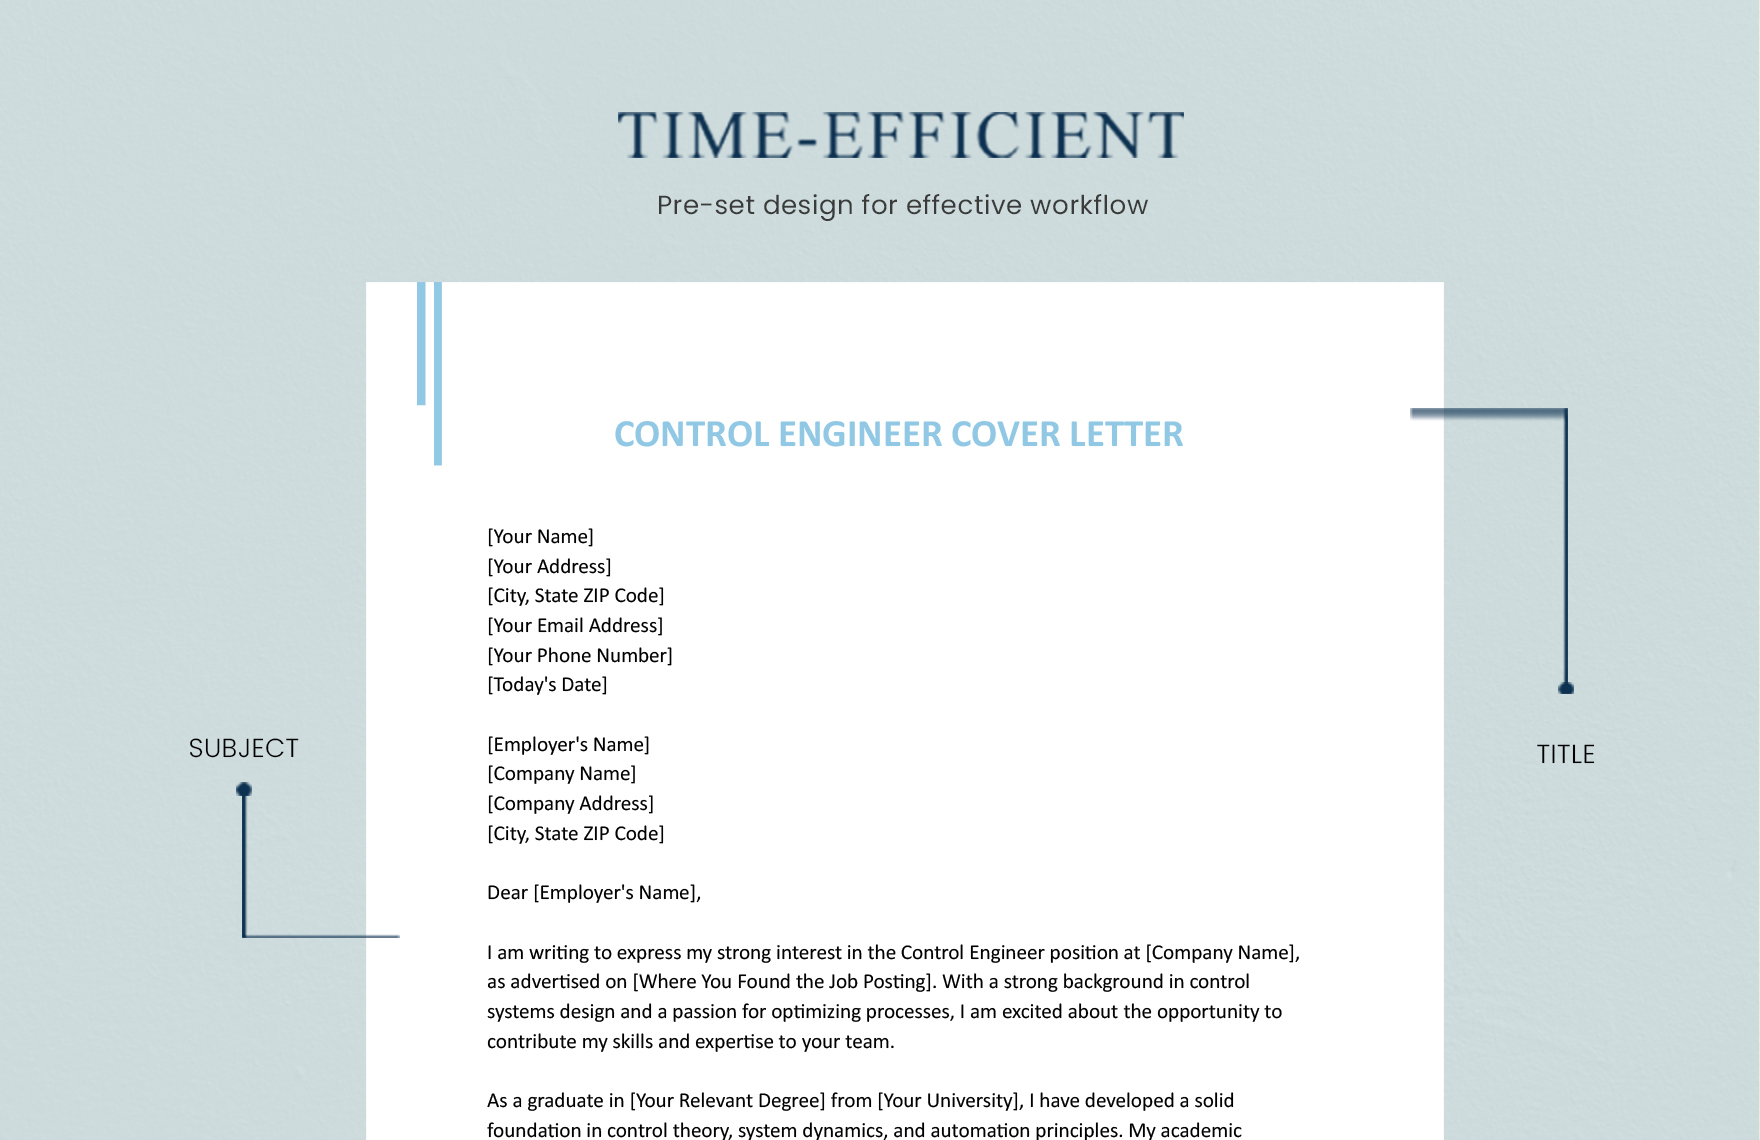 Control Engineer Cover Letter